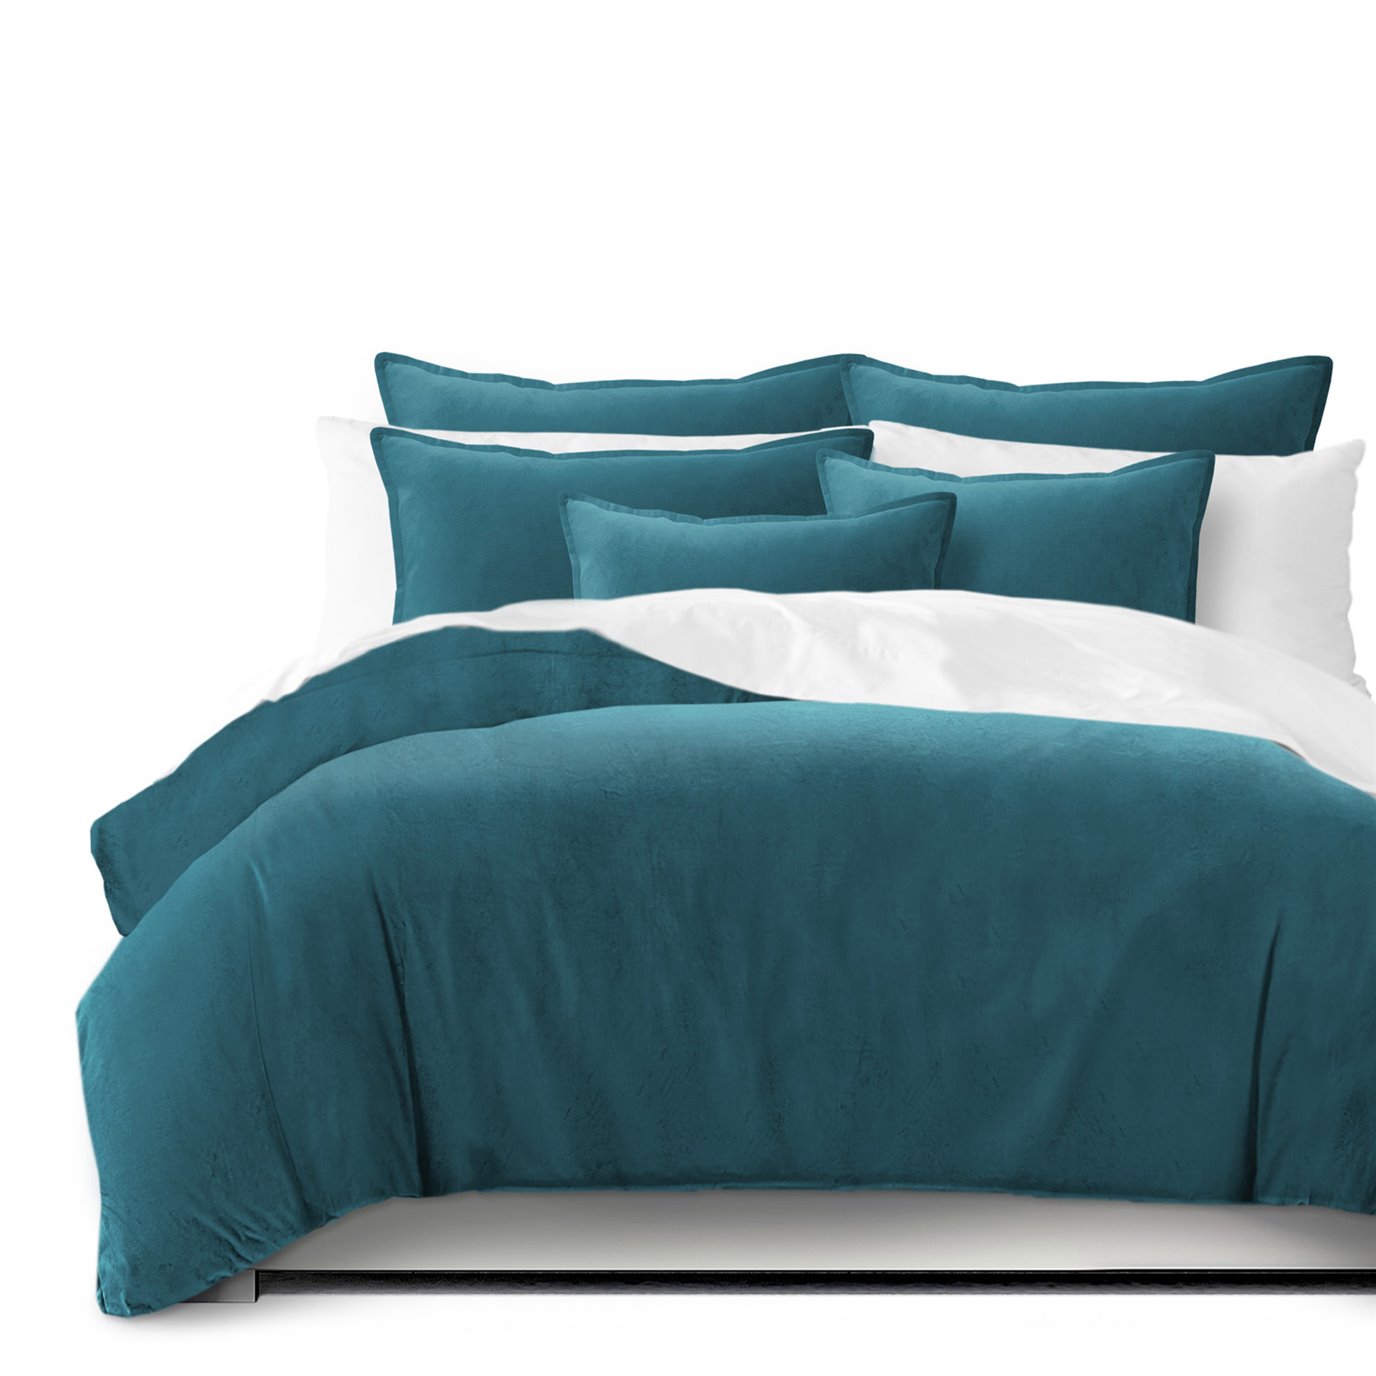 Vanessa Turquoise Comforter and Pillow Sham(s) Set - Size Super Queen